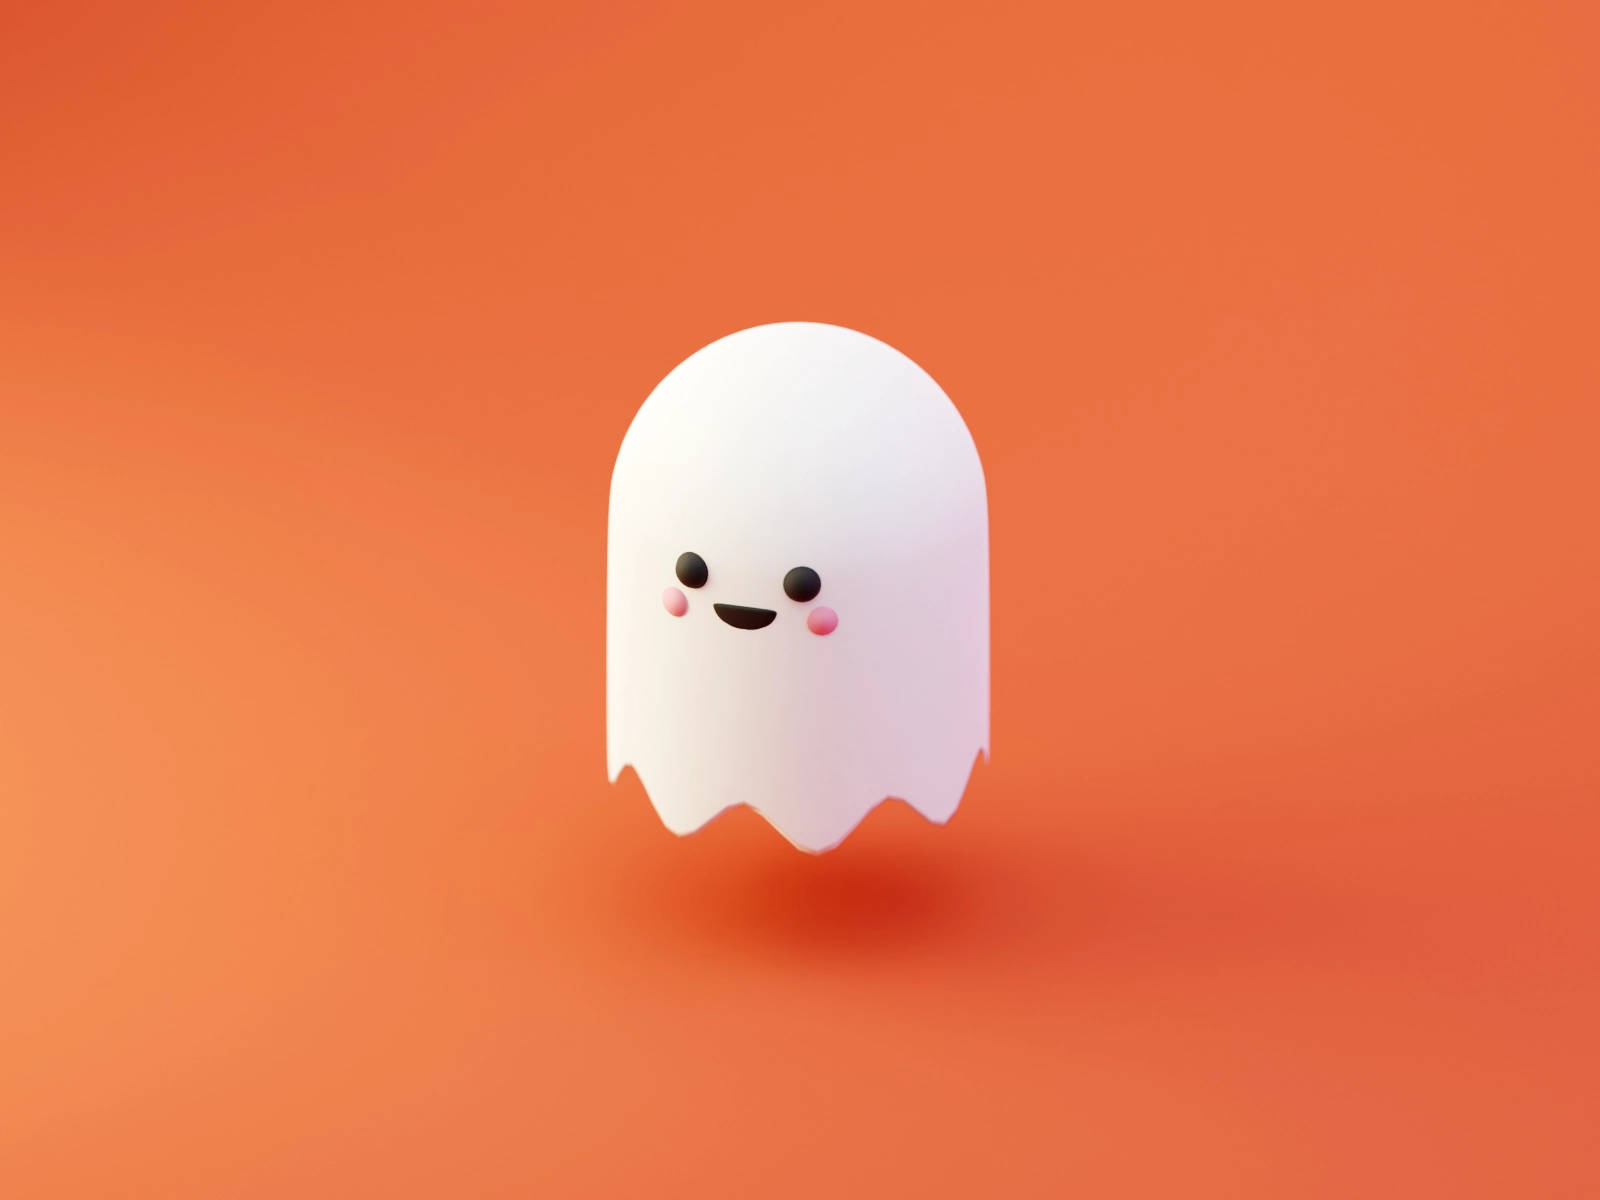 Cool 3d Ghost White In Orange